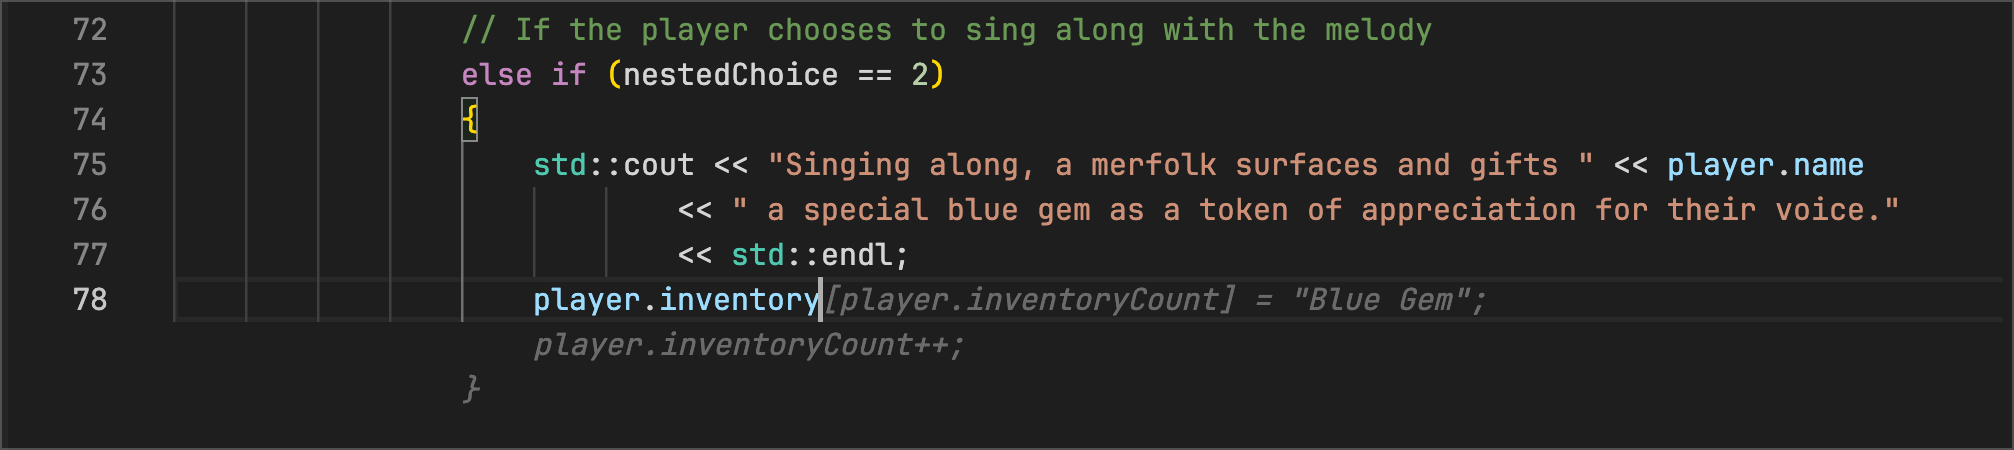 adventure.cpp - Code Suggestions shows us how to add a gem to the player's inventory using a post-increment operation and the inventory array from the struct object